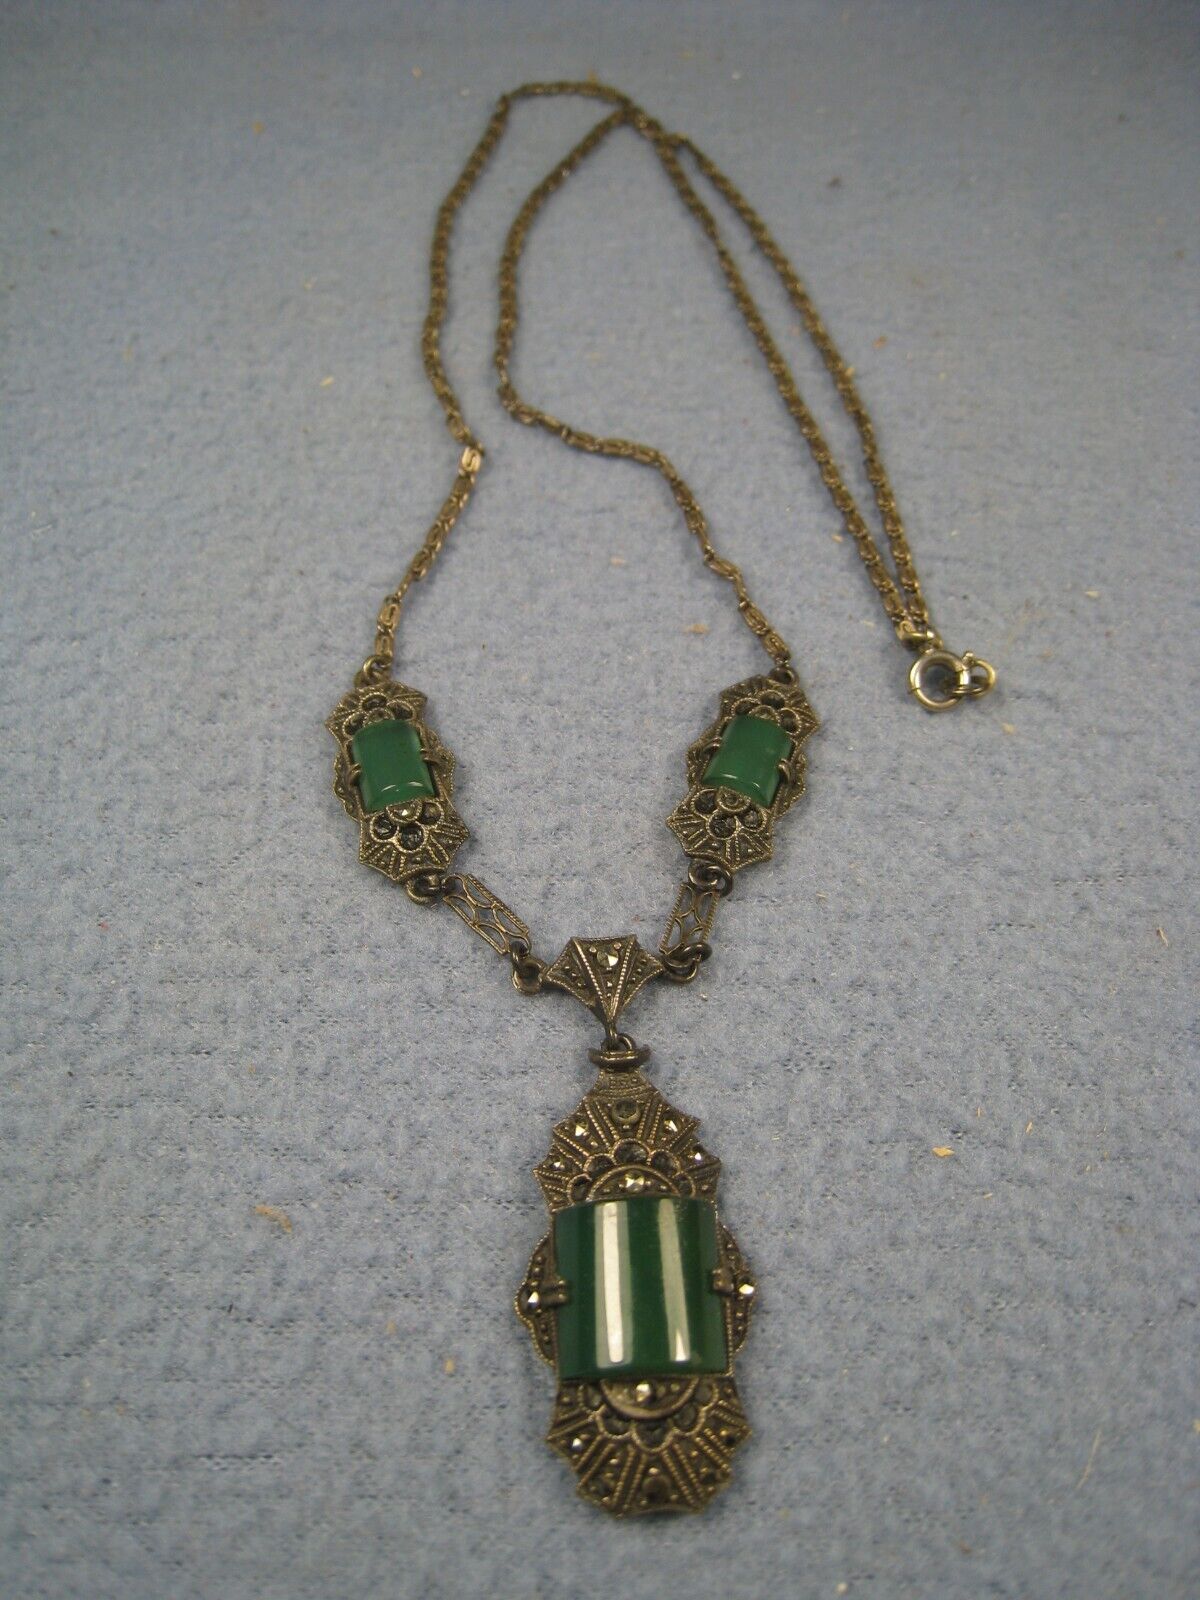 Nice Vintage Art Deco Style German Necklace with Green stones Marked Sterling